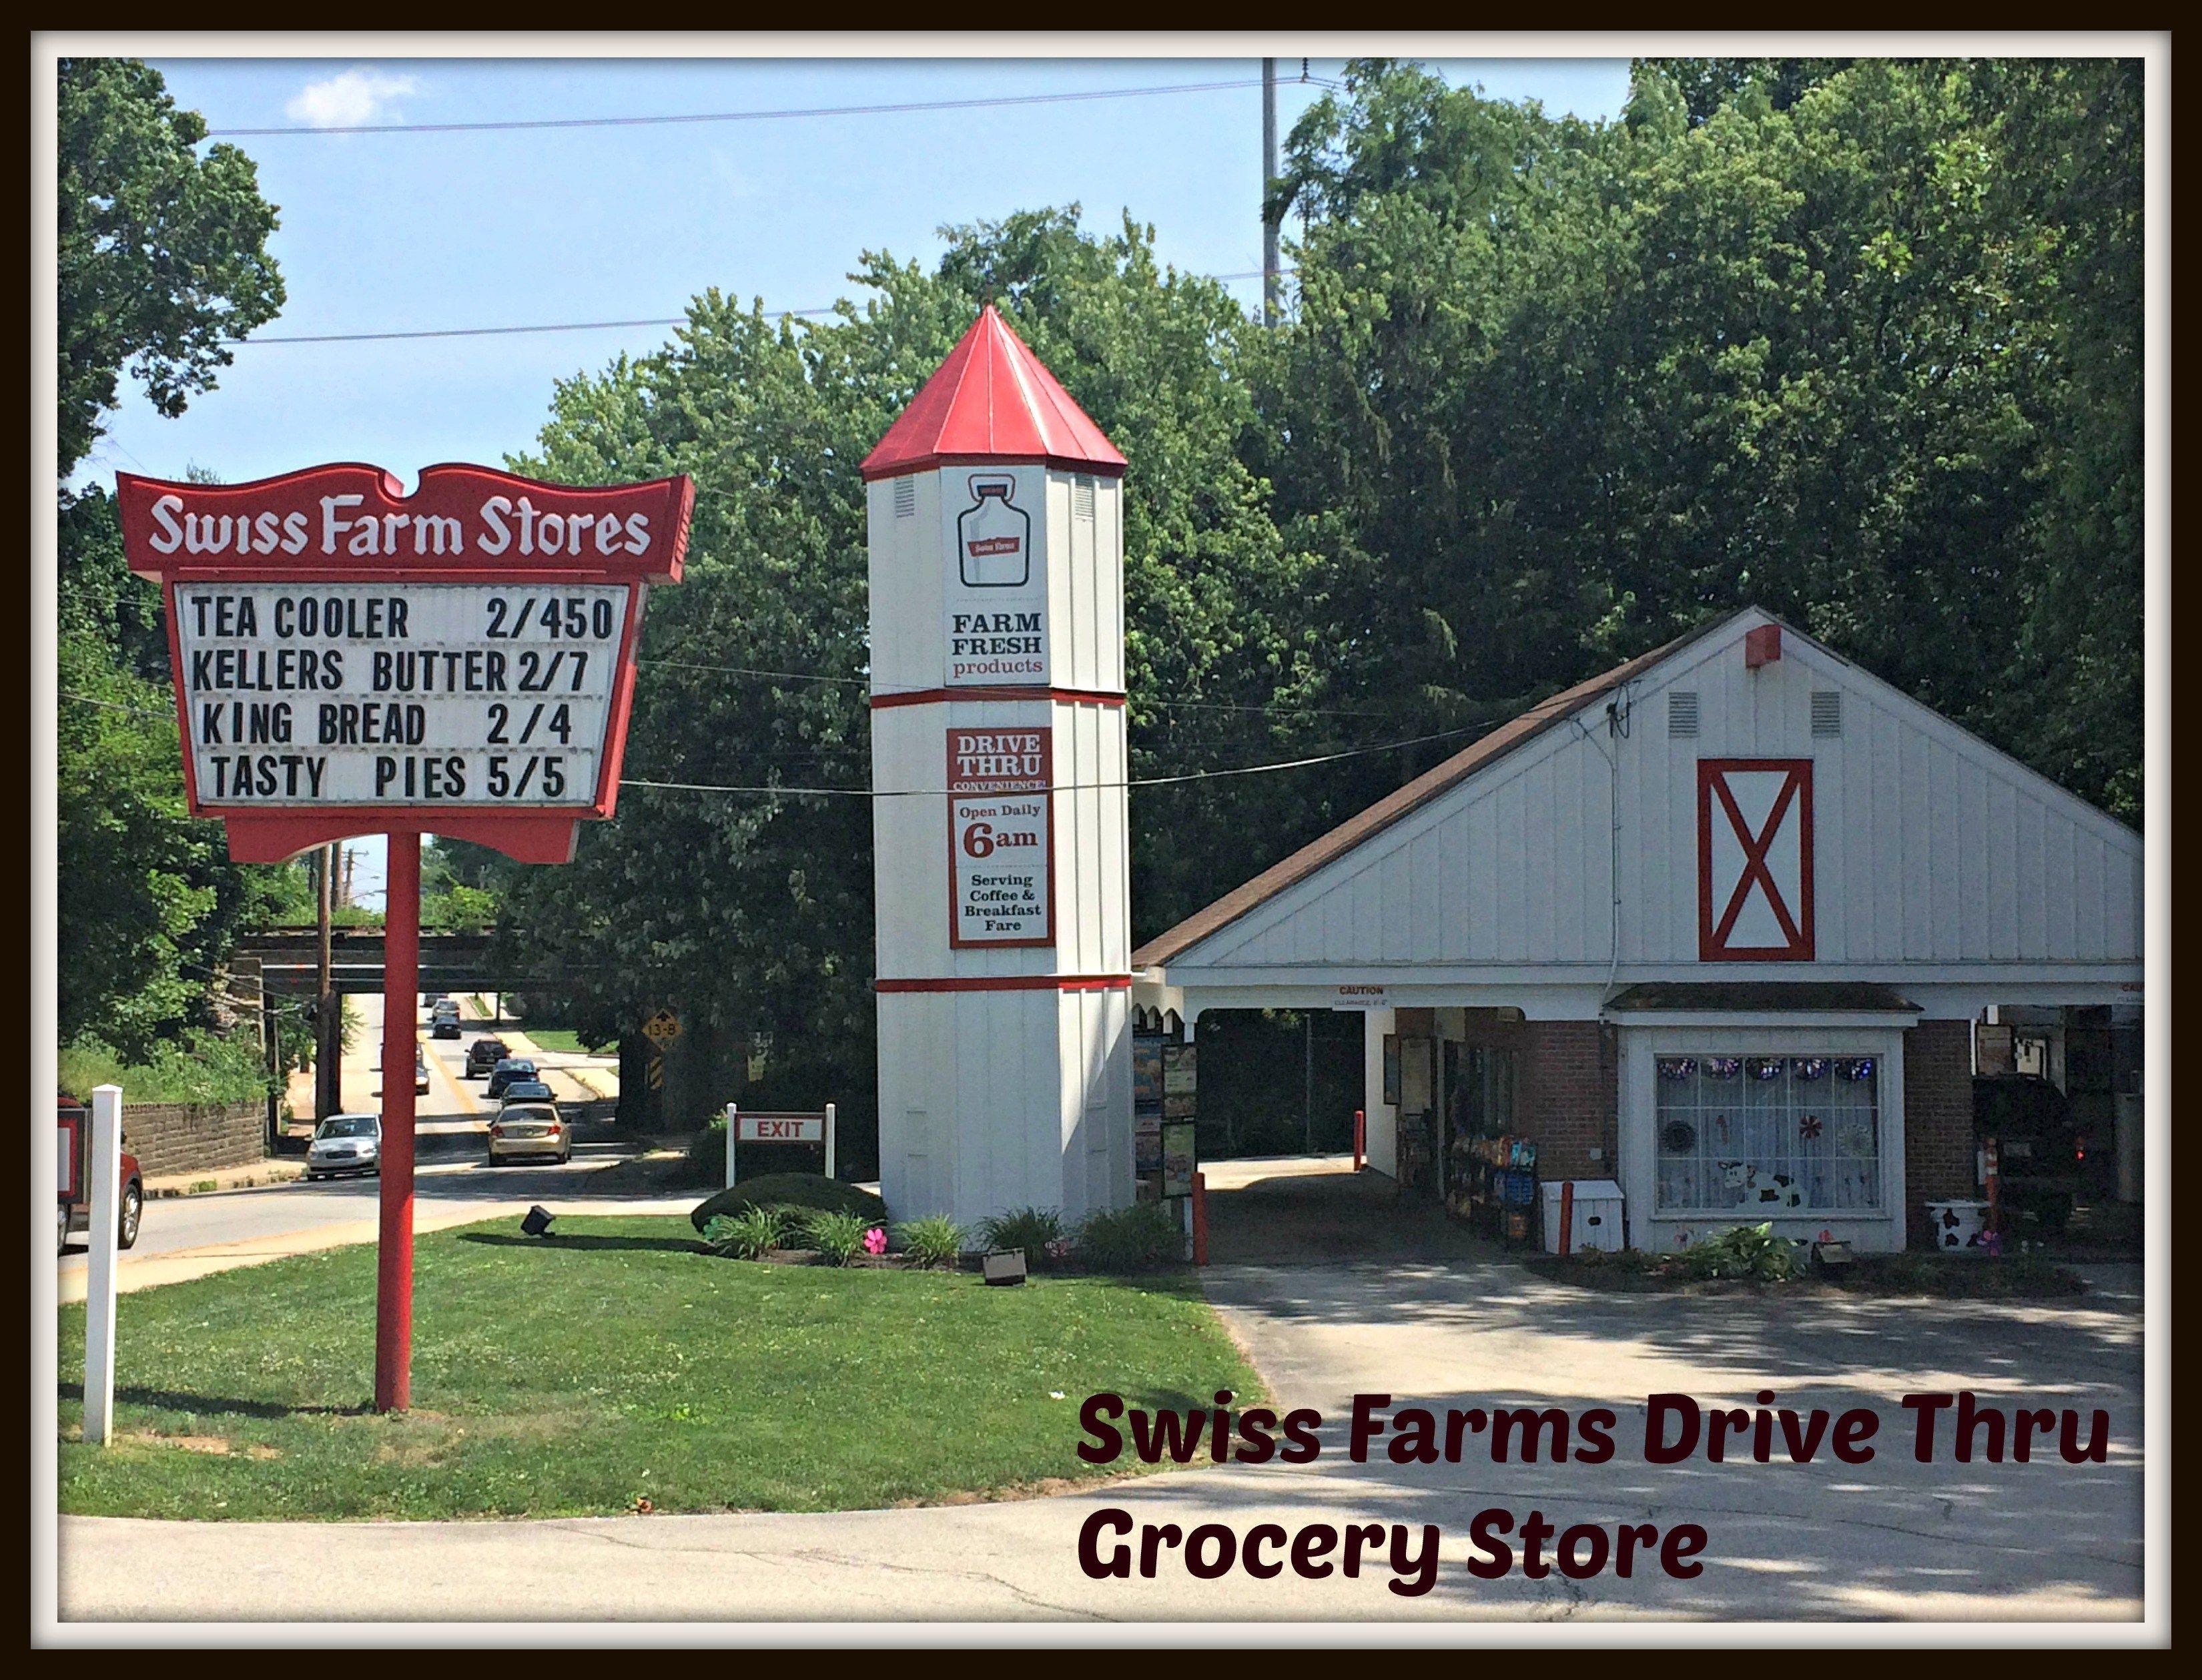 Swiss Farms Logo - Swiss Farms Drive Thru Grocery Store – Milk, Meals and More!